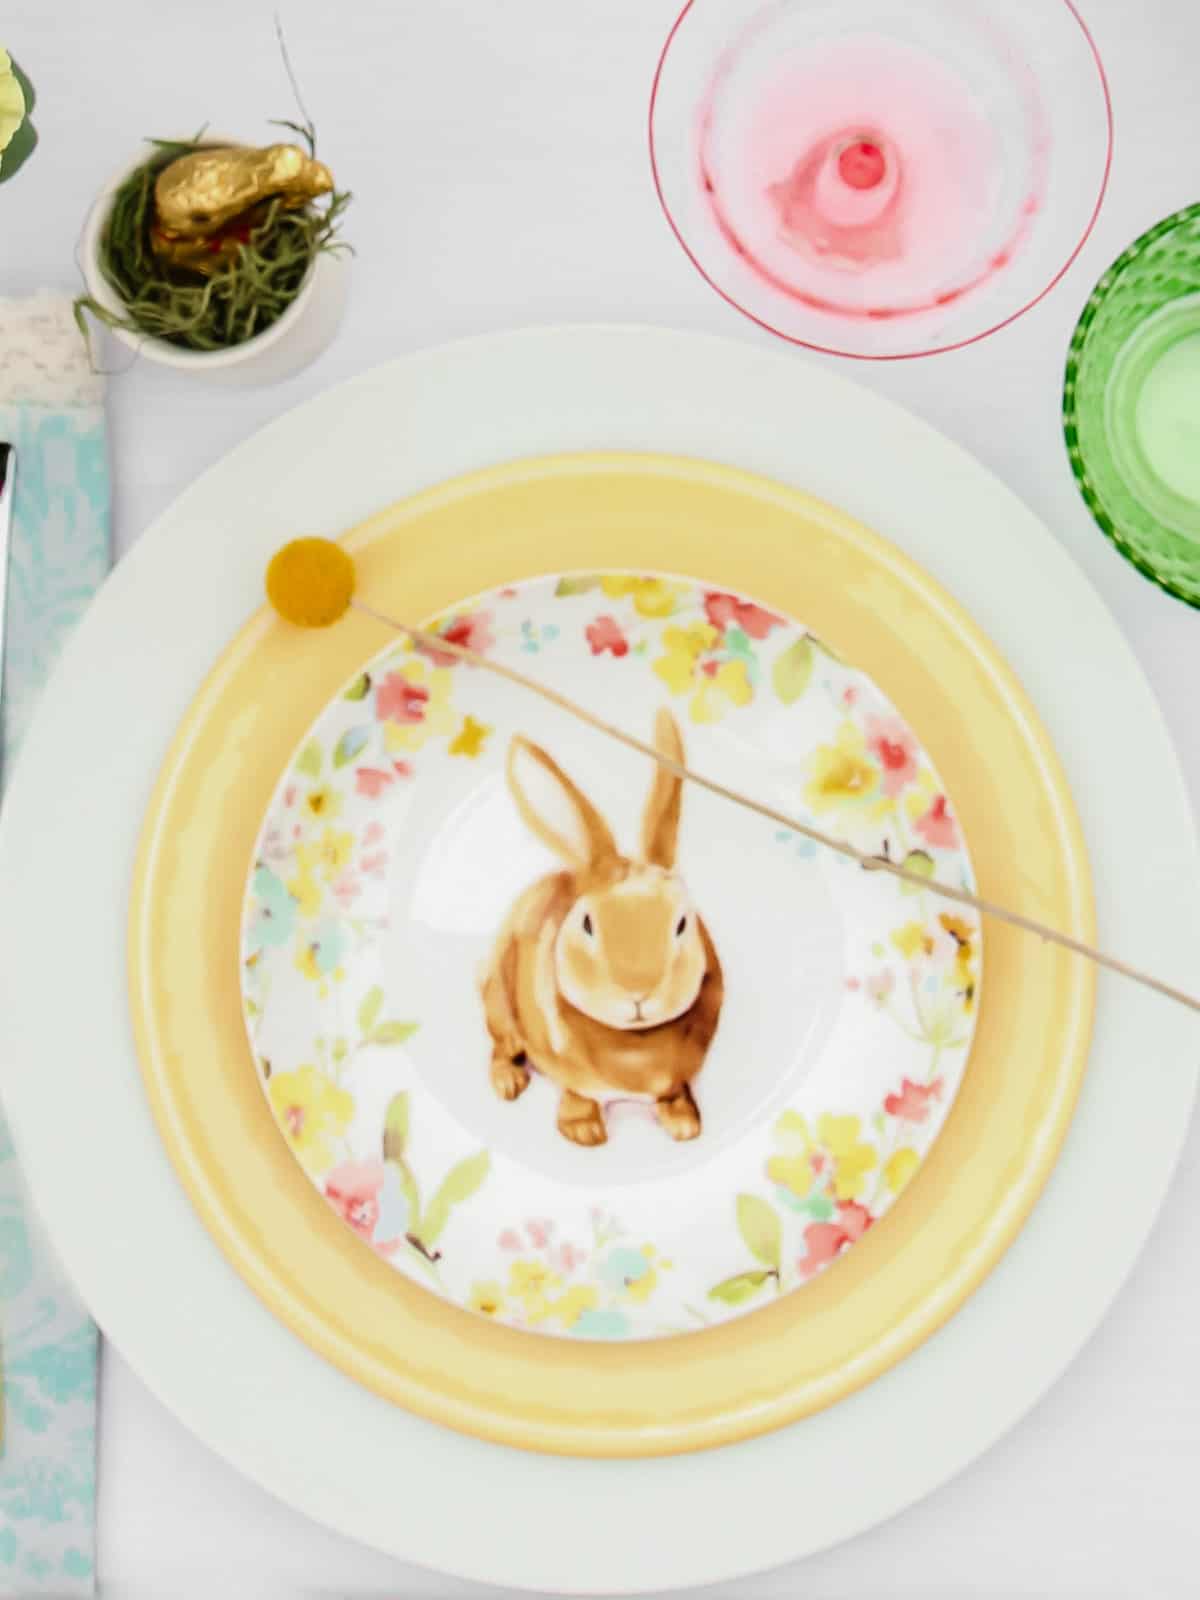 Easter themed salad plate layered on top of yellow plate and white dinner plate, on white tablecloth.